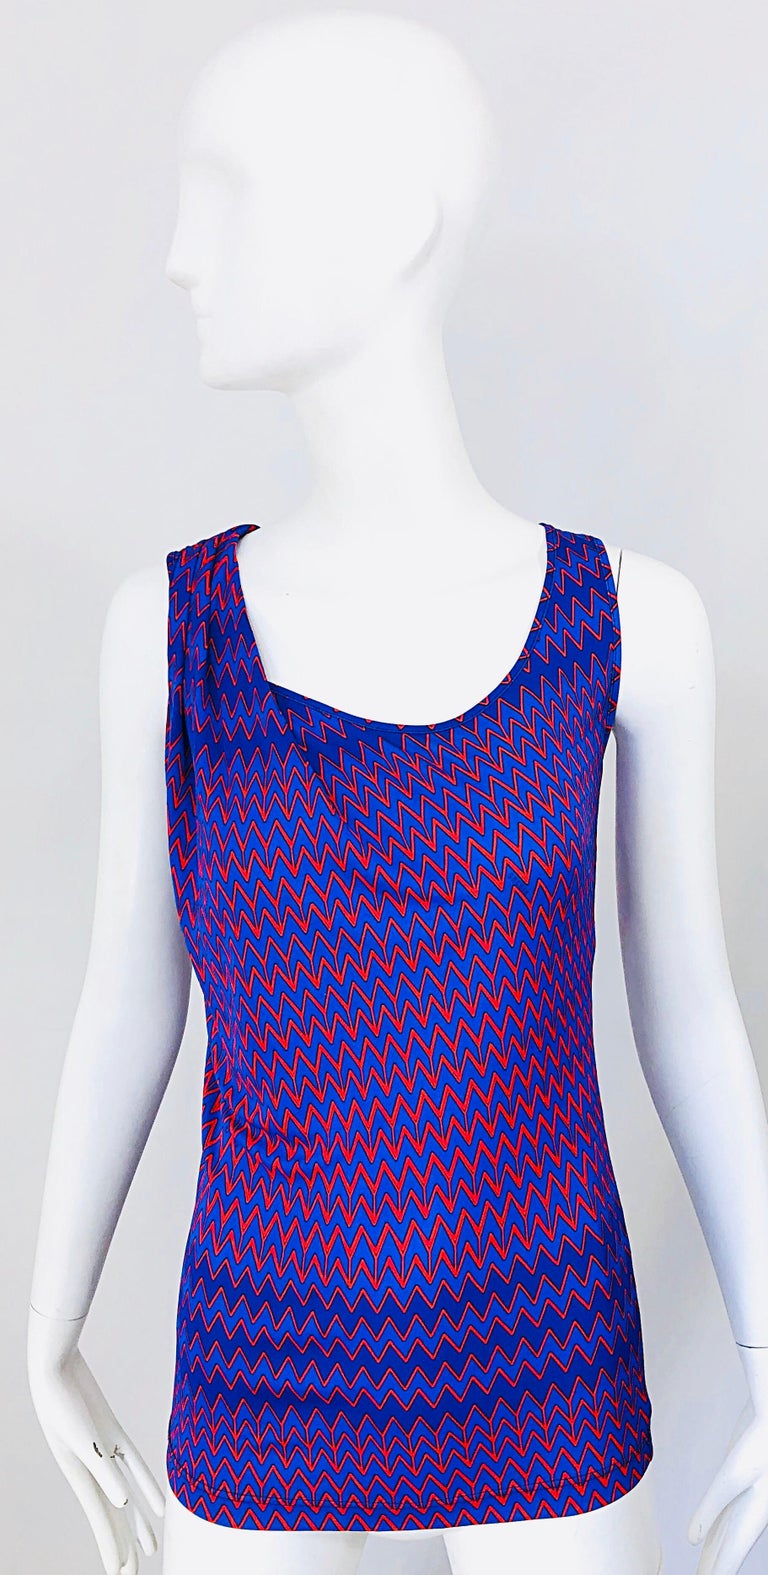 Flattering early 2000s GIANNI VERSACE Versus blue and red chevron zig zag V logo print sleeveless rayon jersey top ! Features two shades of blue and one shade of lipstick red. Draped detail at top right shoulder. Super soft rayon jersey stretches to